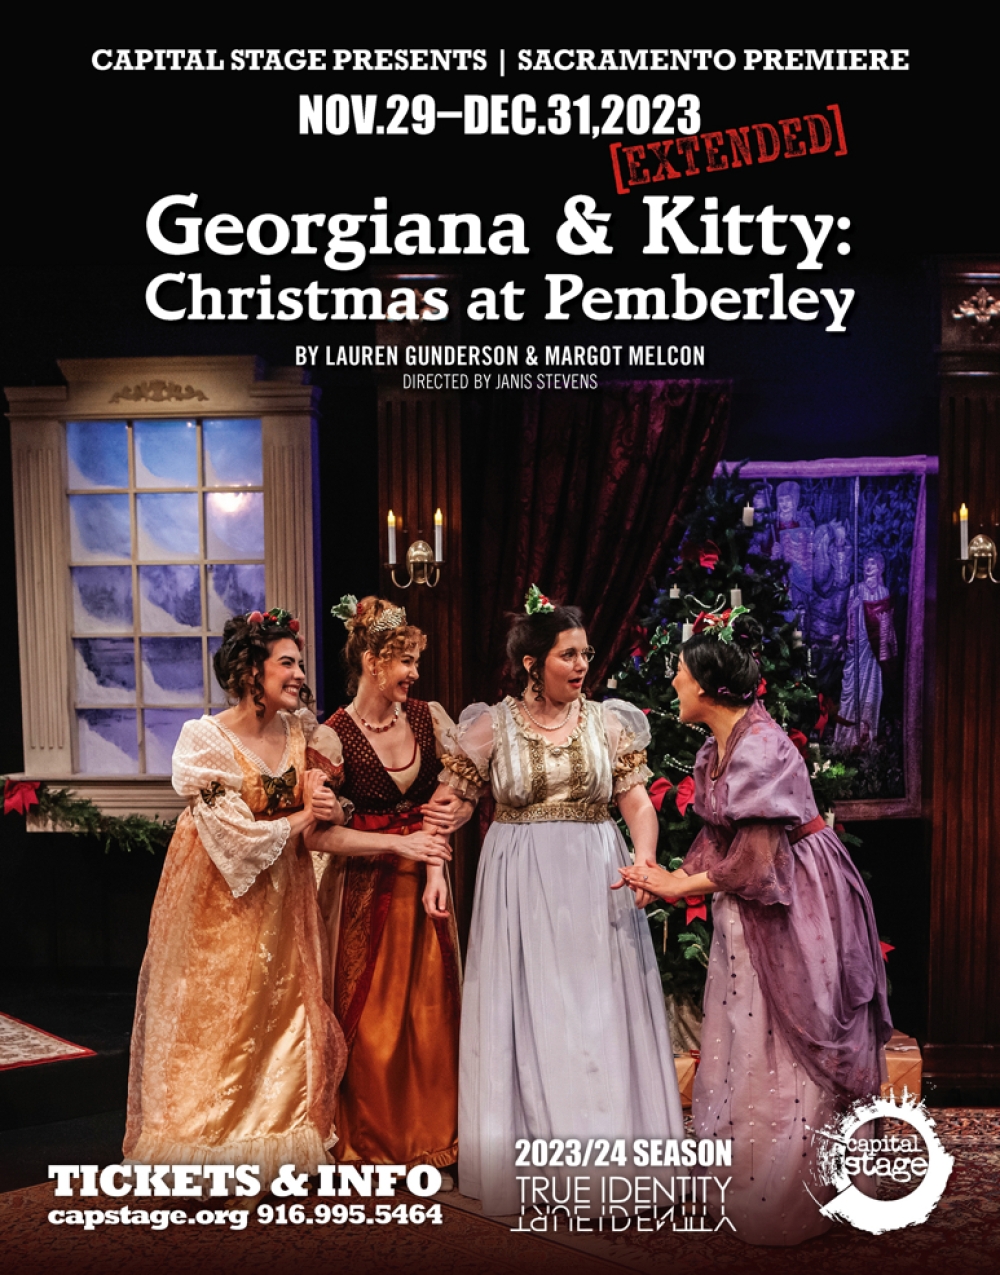 Georgiana and Kitty: Christmas at Pemberley at Capital Stage